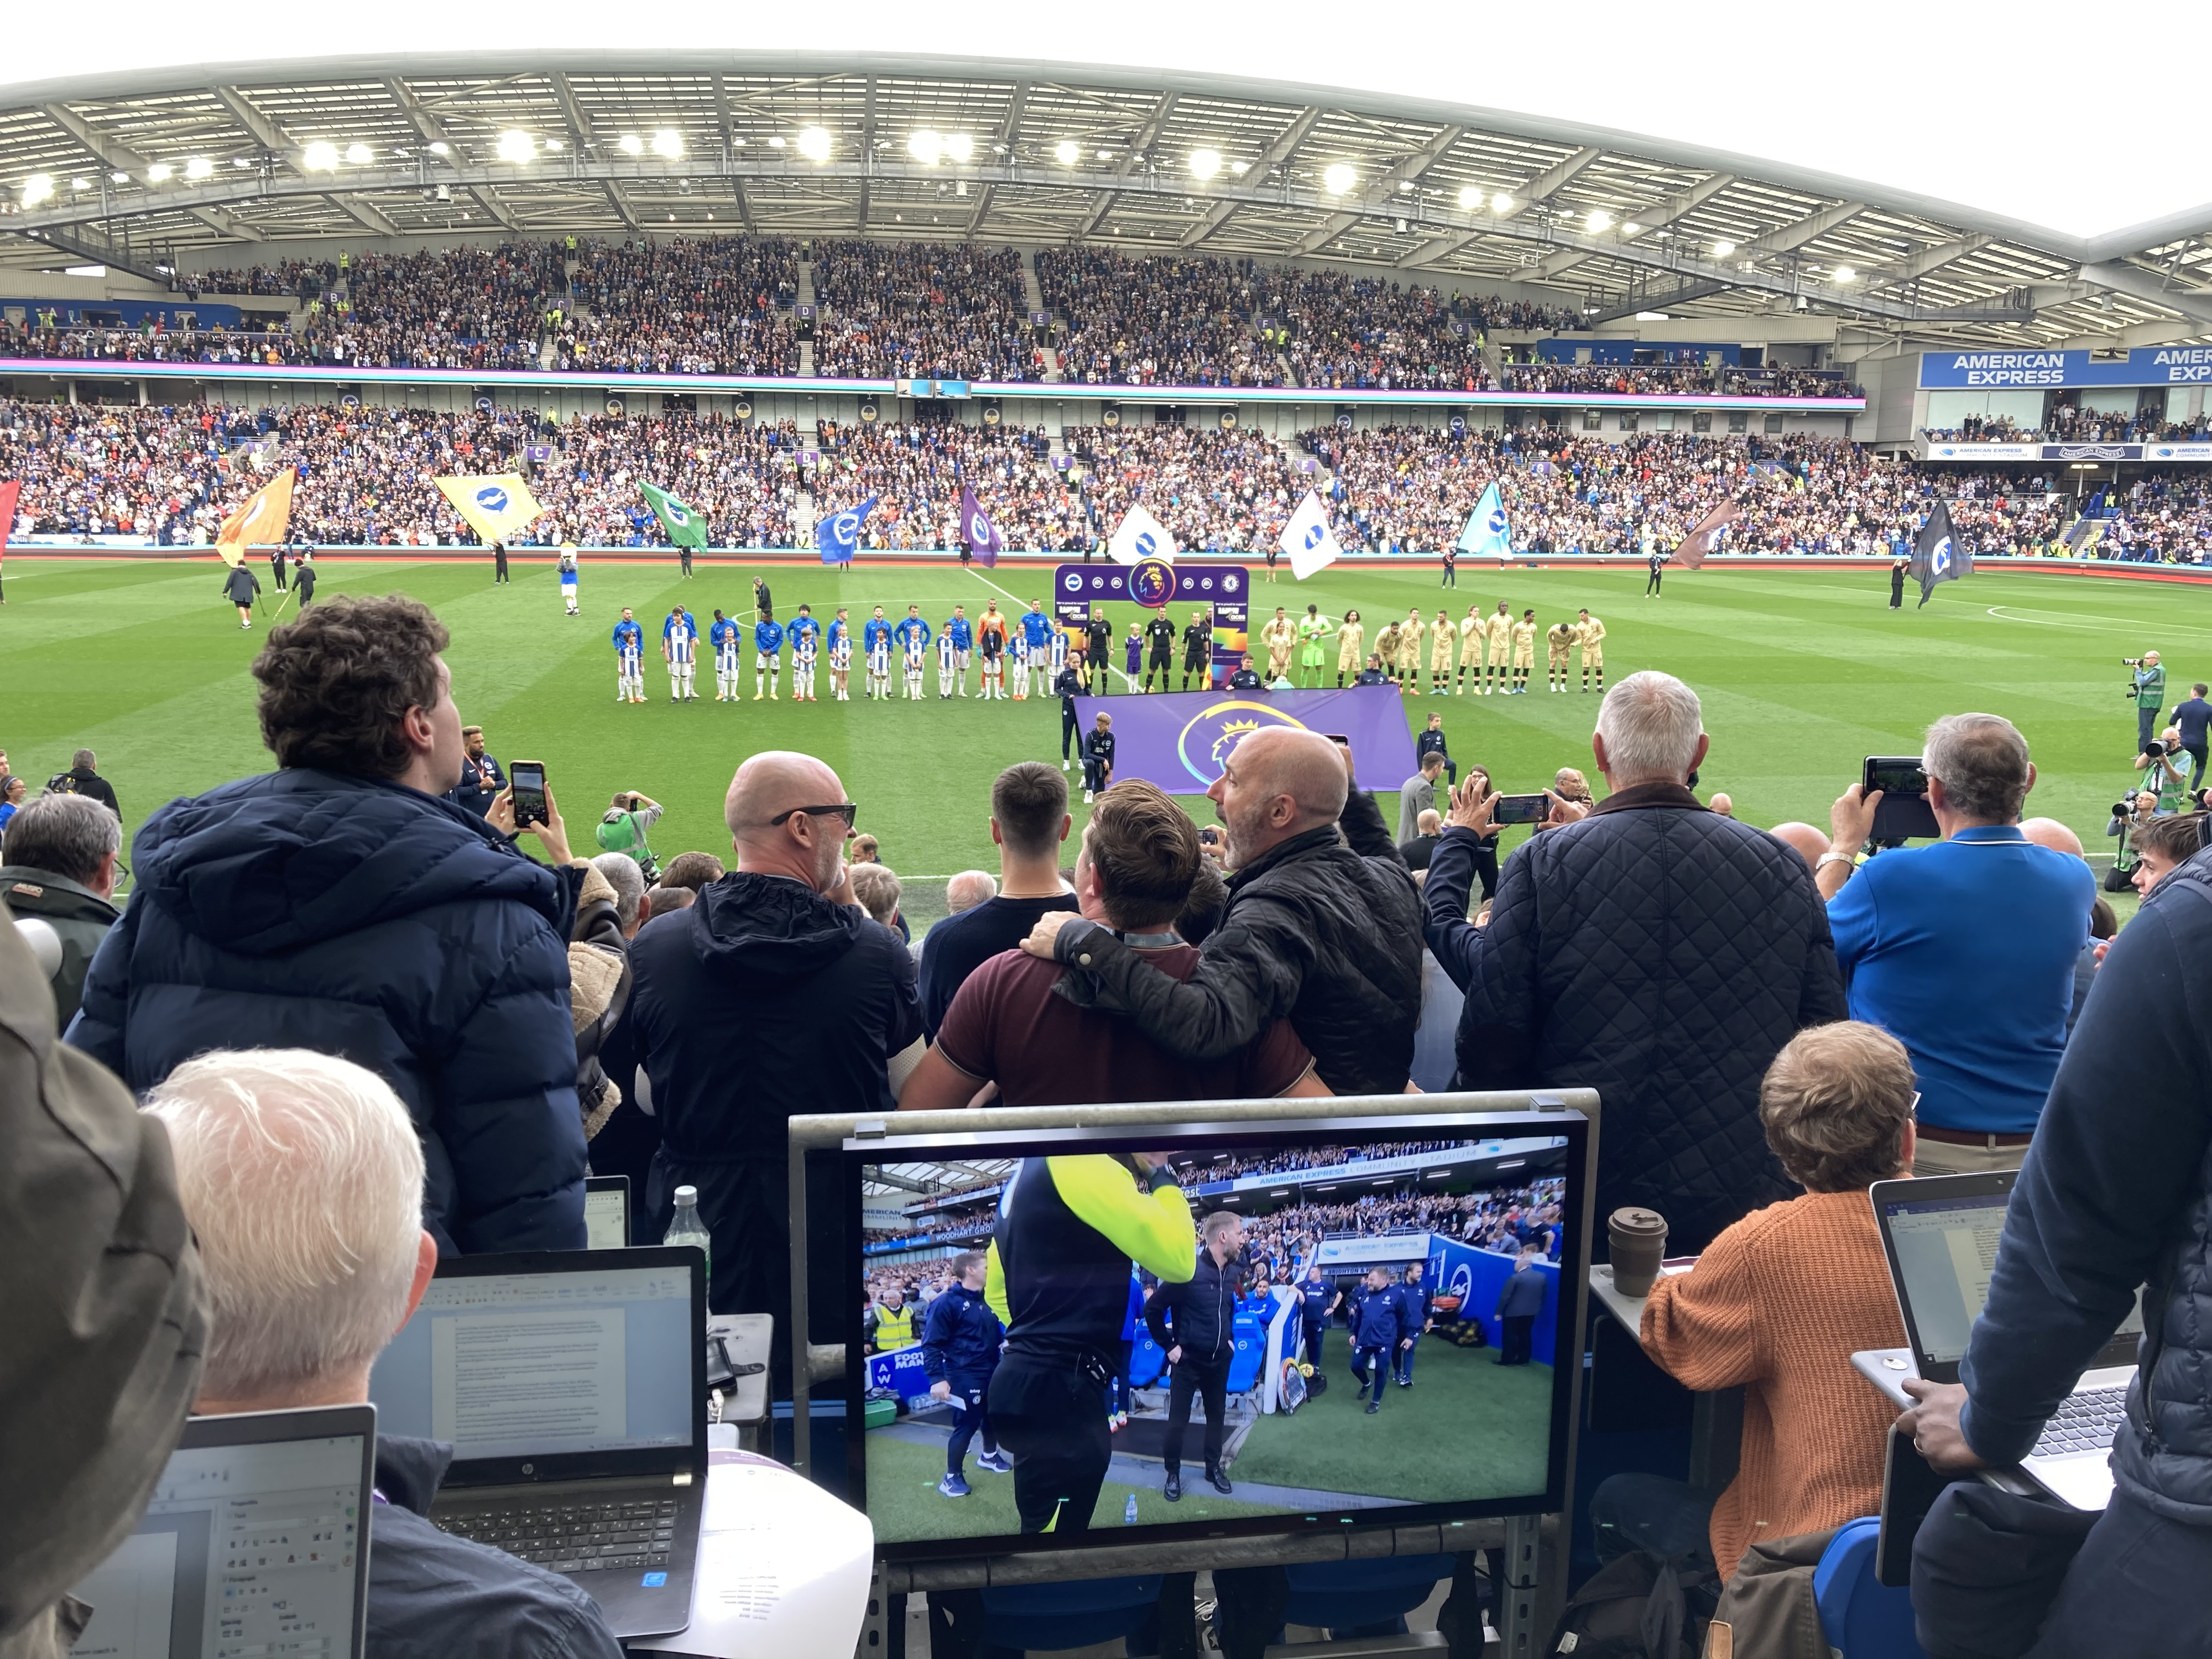 Brian Owen on Brighton’s 4-1 win over Chelsea - and why it’s now time to look ahead